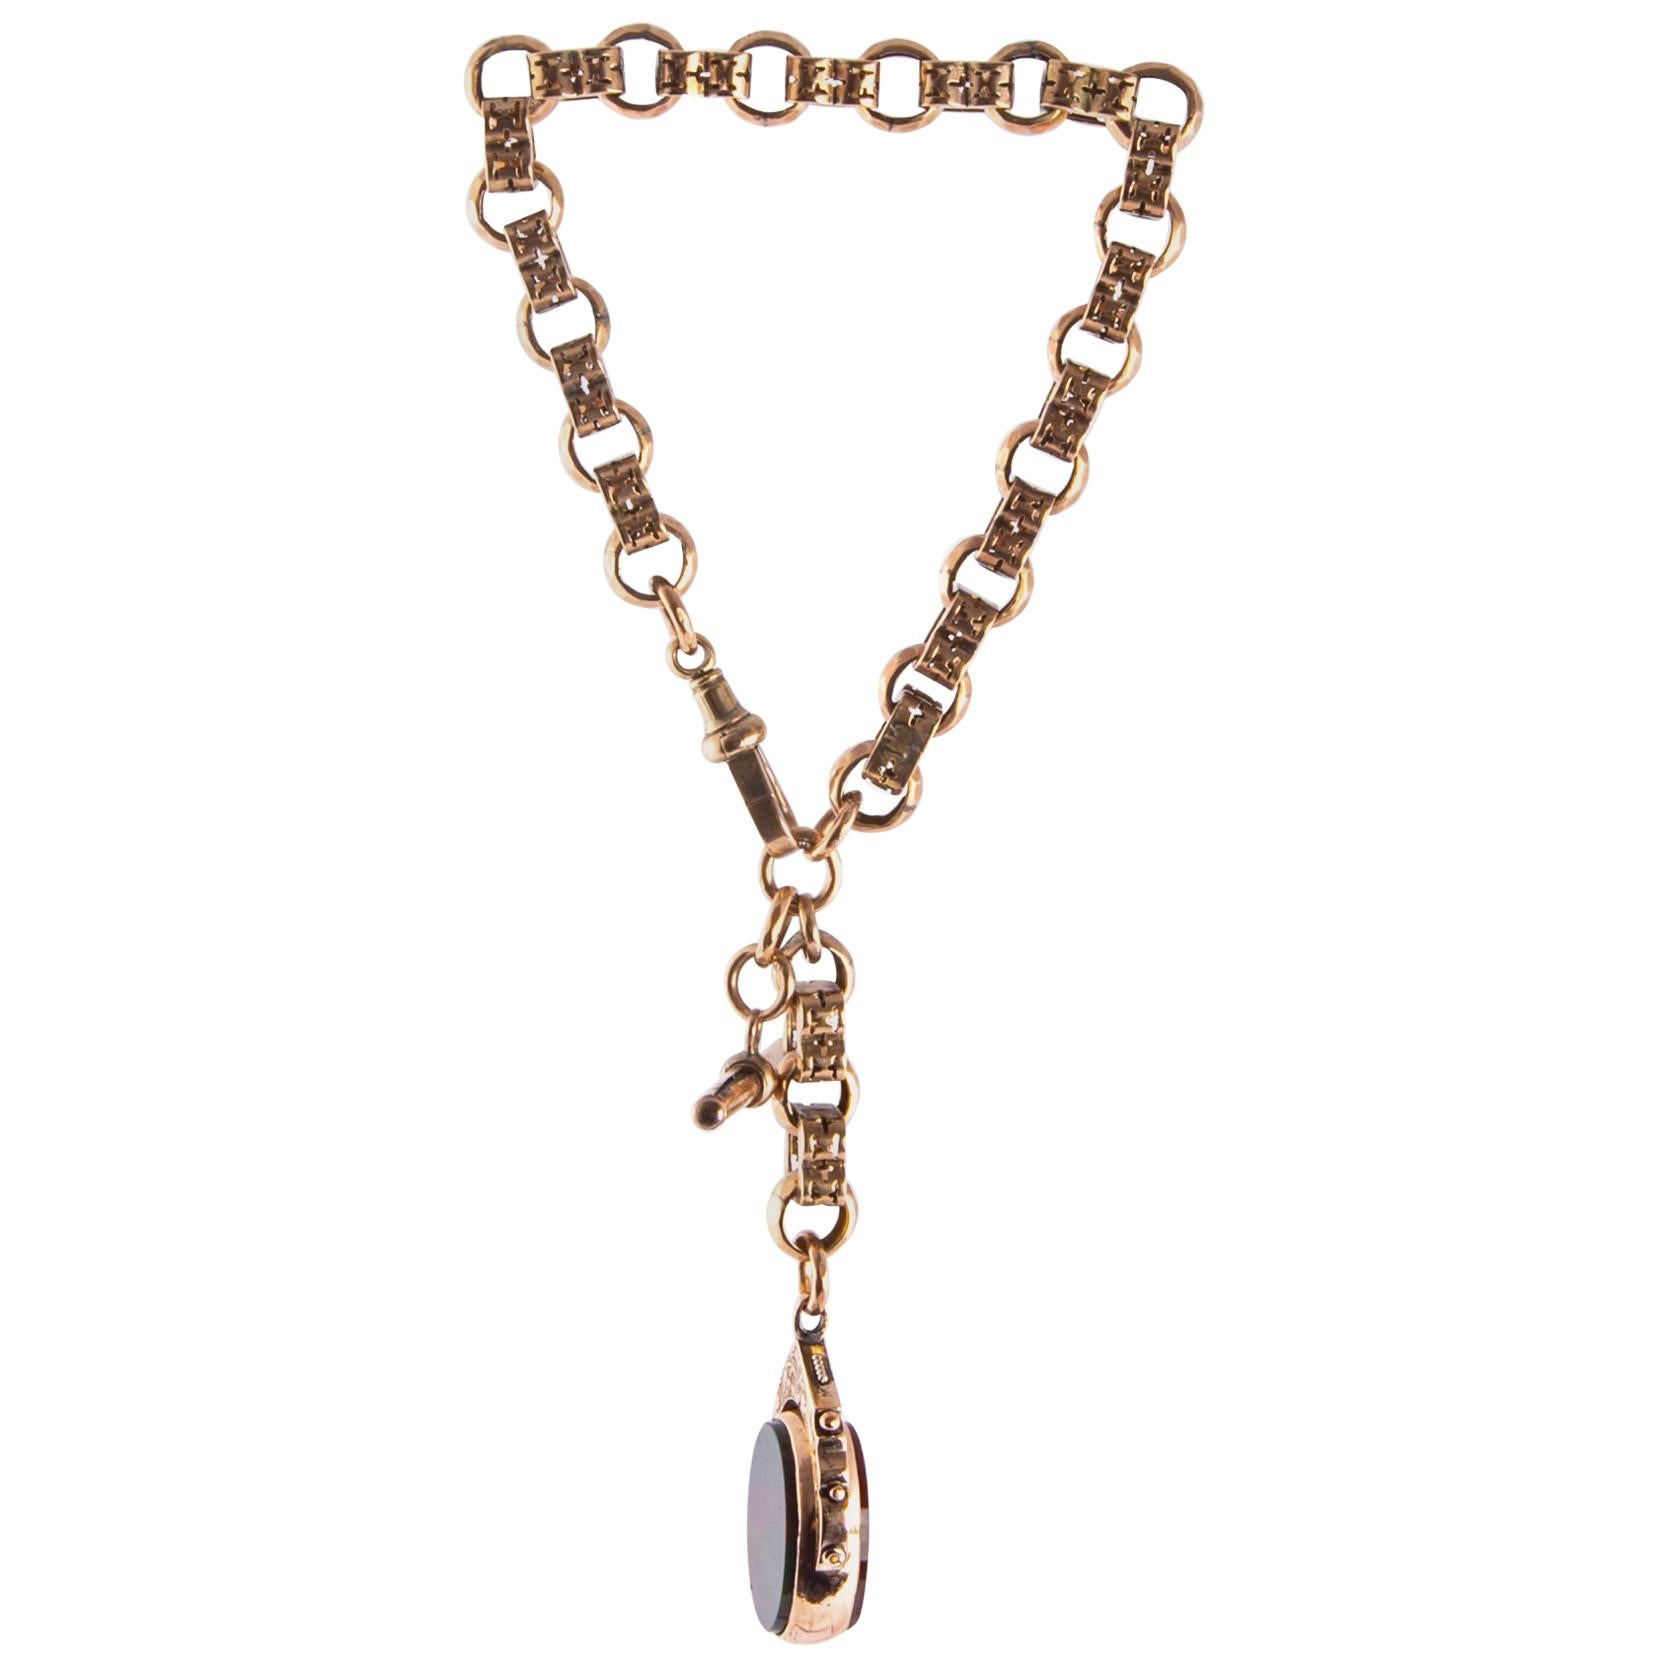 Victorian 9 Carat Gold Albert Chain with Spinning Fob